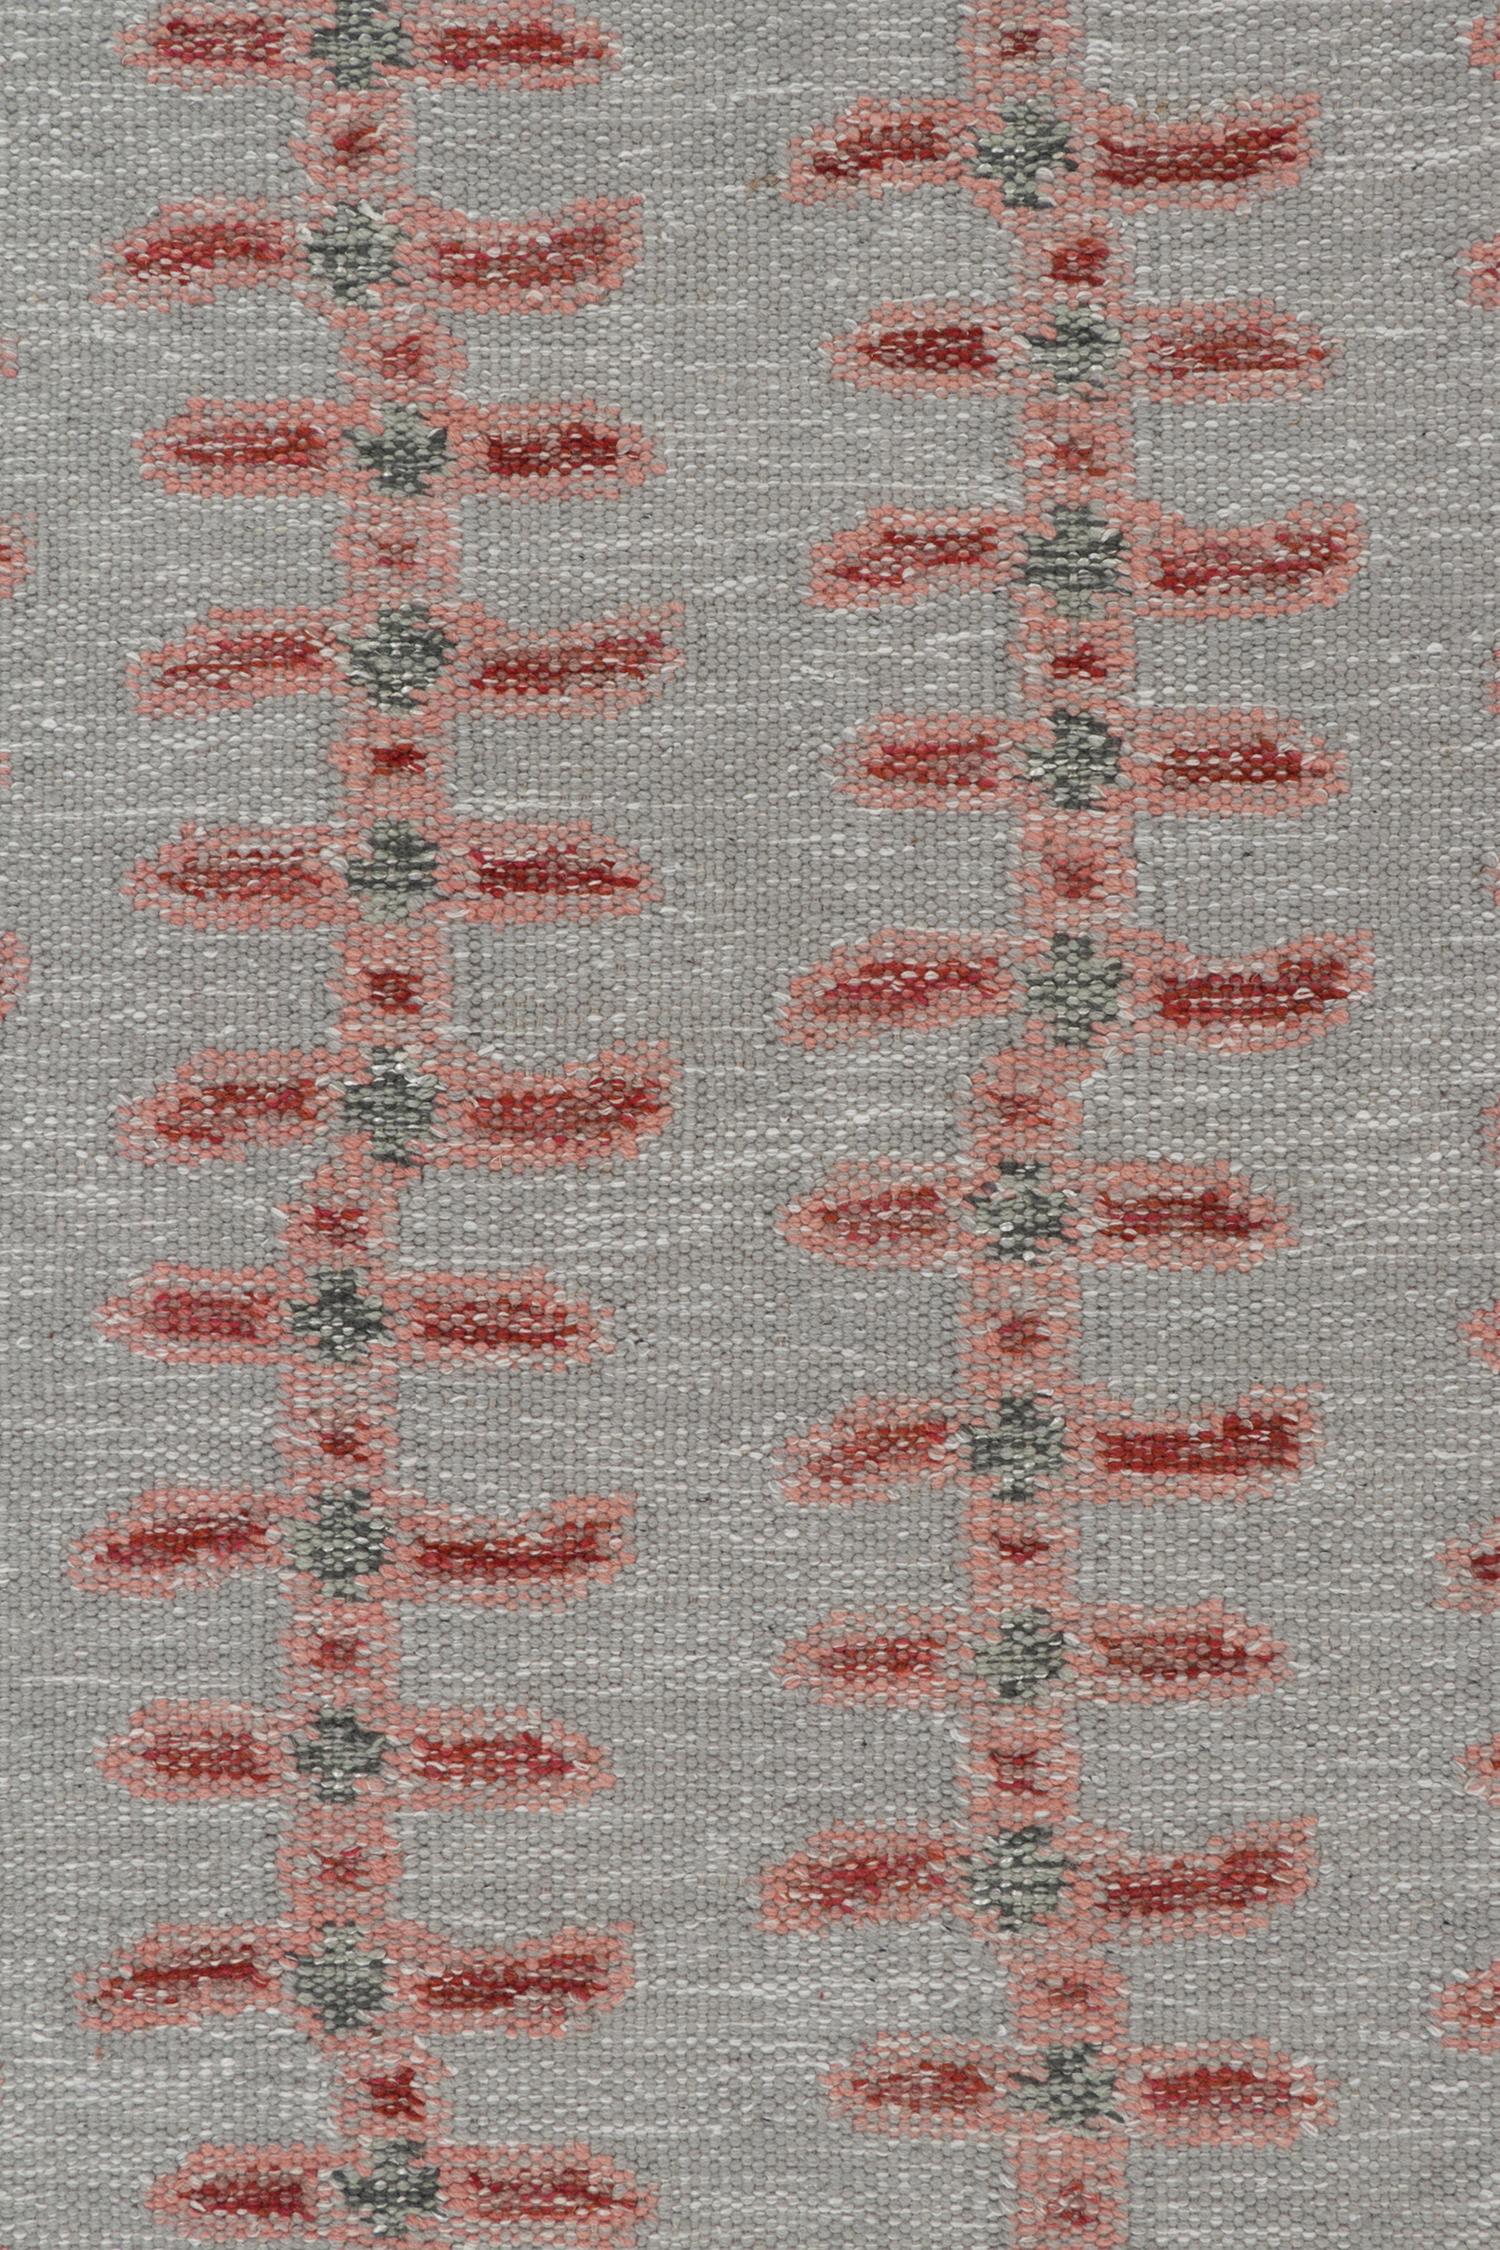 Rug & Kilim's Scandinavian Style Kilim Rug in Gray, Red & Pink In New Condition For Sale In Long Island City, NY